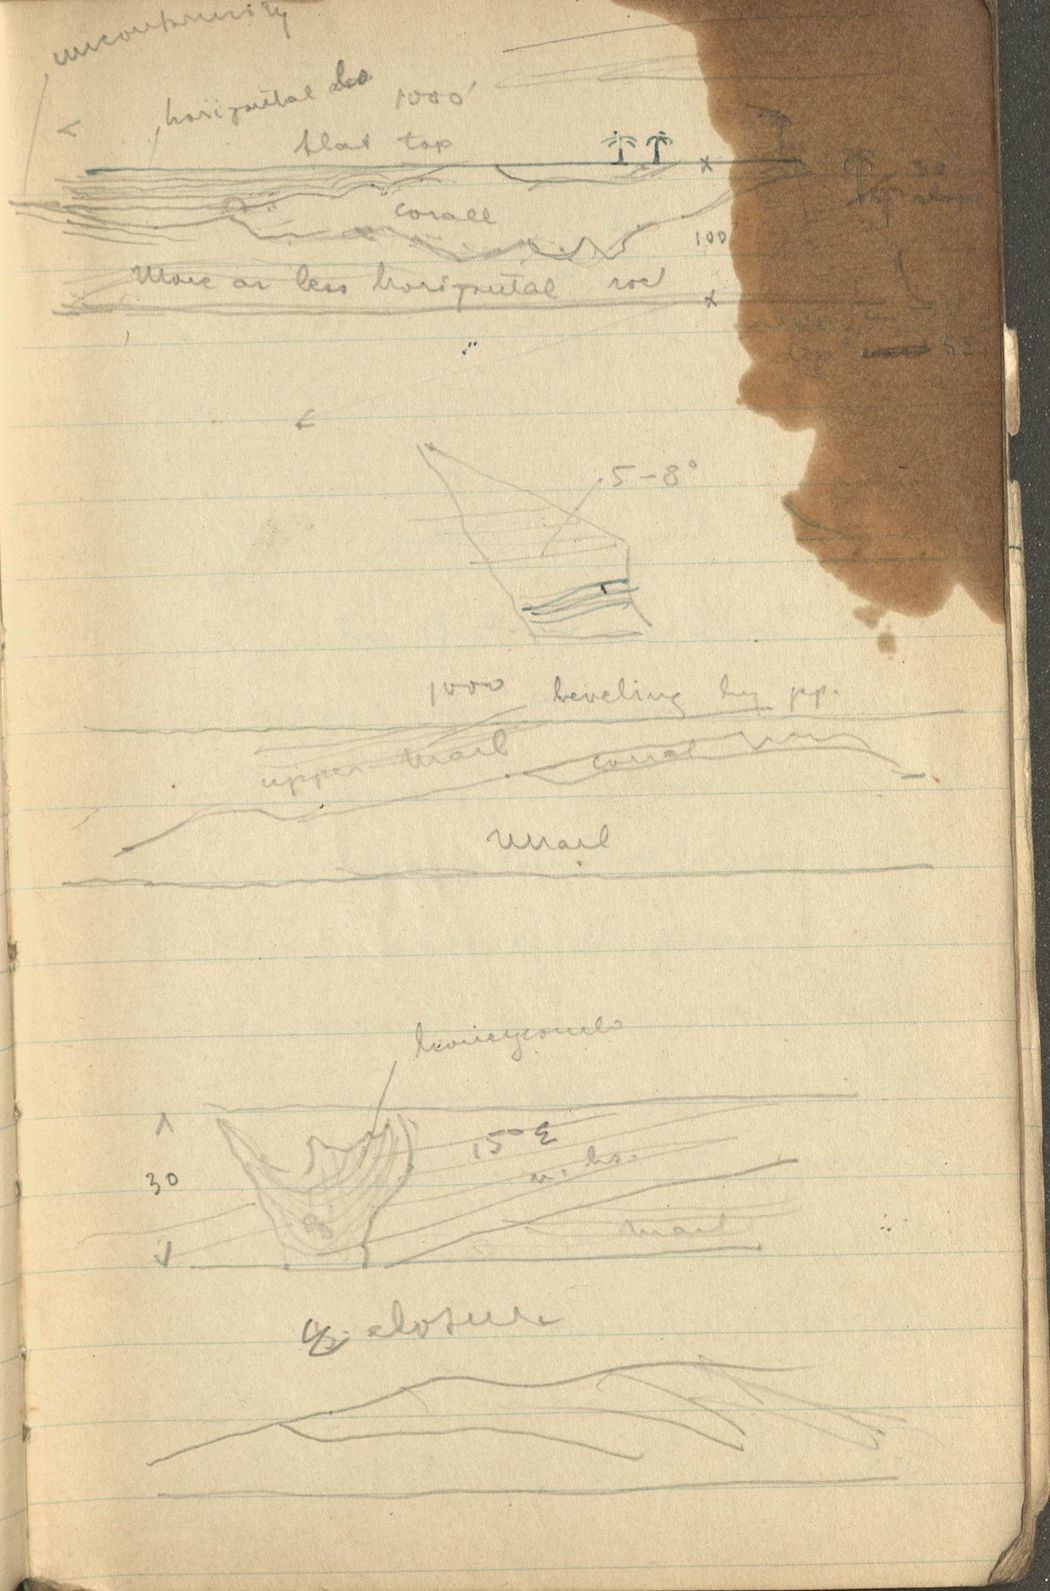 Erwin Raisz, sketch pages from the Erwin Raisz notebooks archival collection